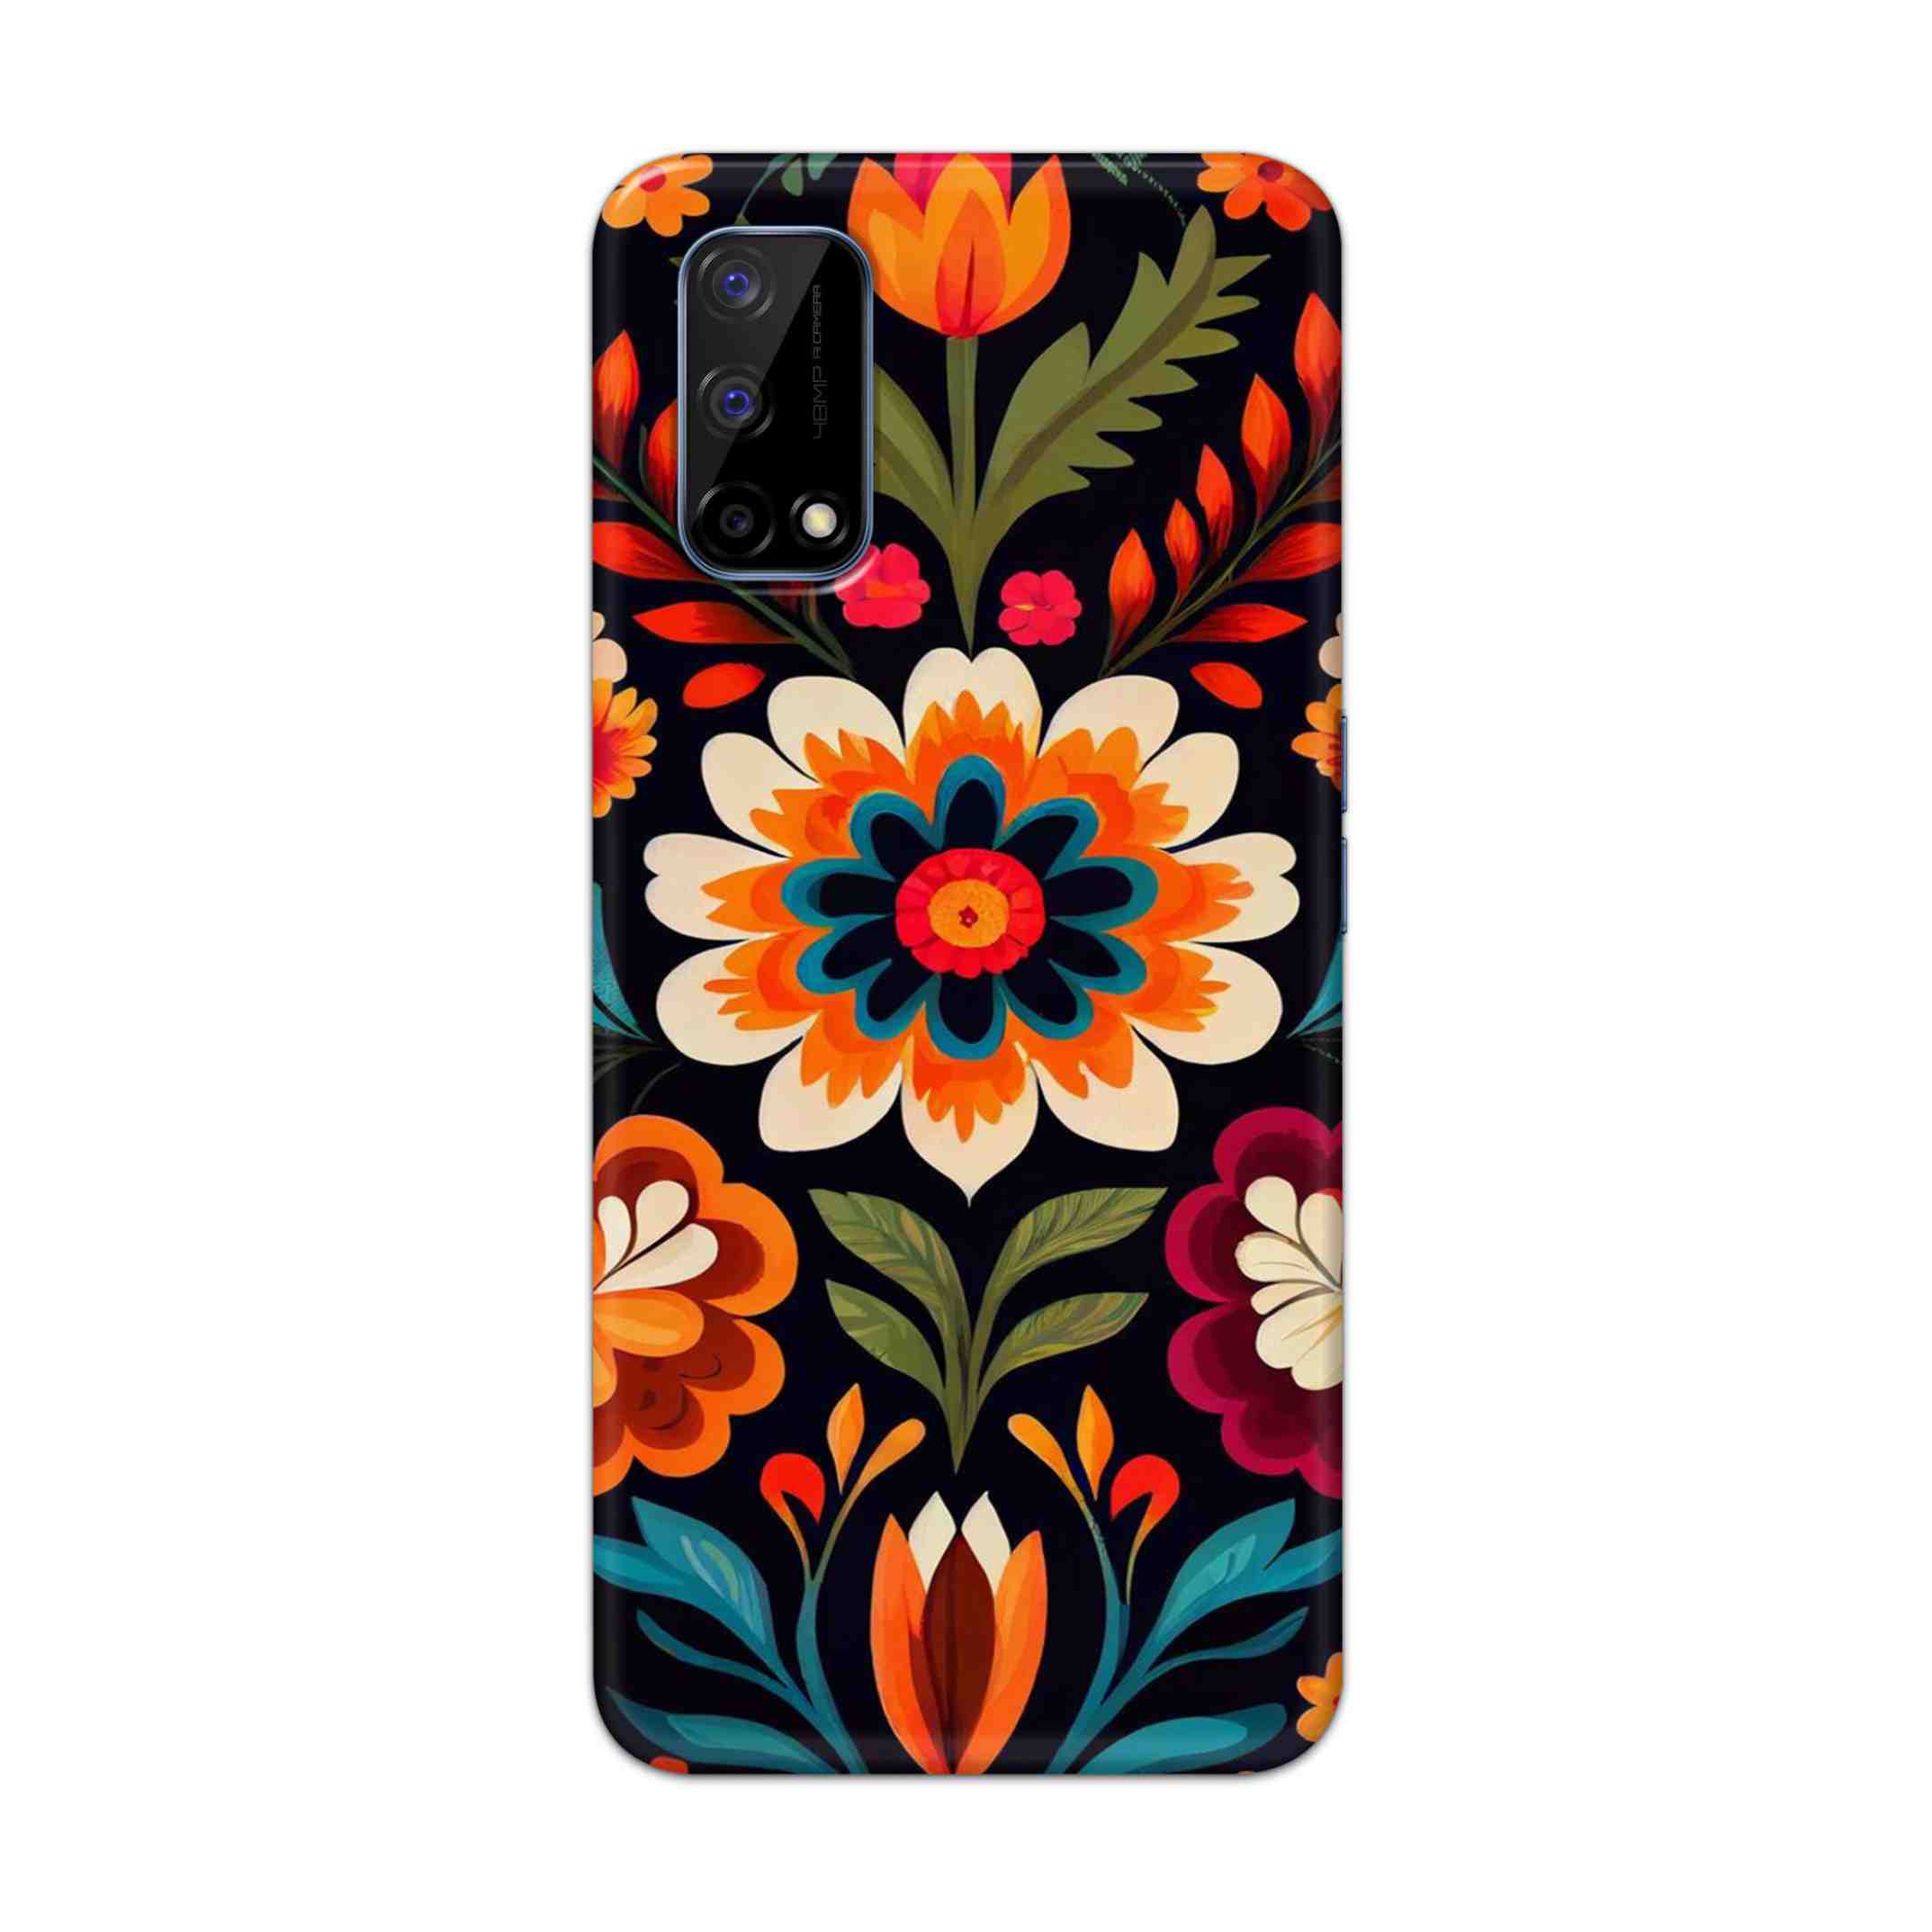 Buy Flower Hard Back Mobile Phone Case Cover For Realme Narzo 30 Pro Online